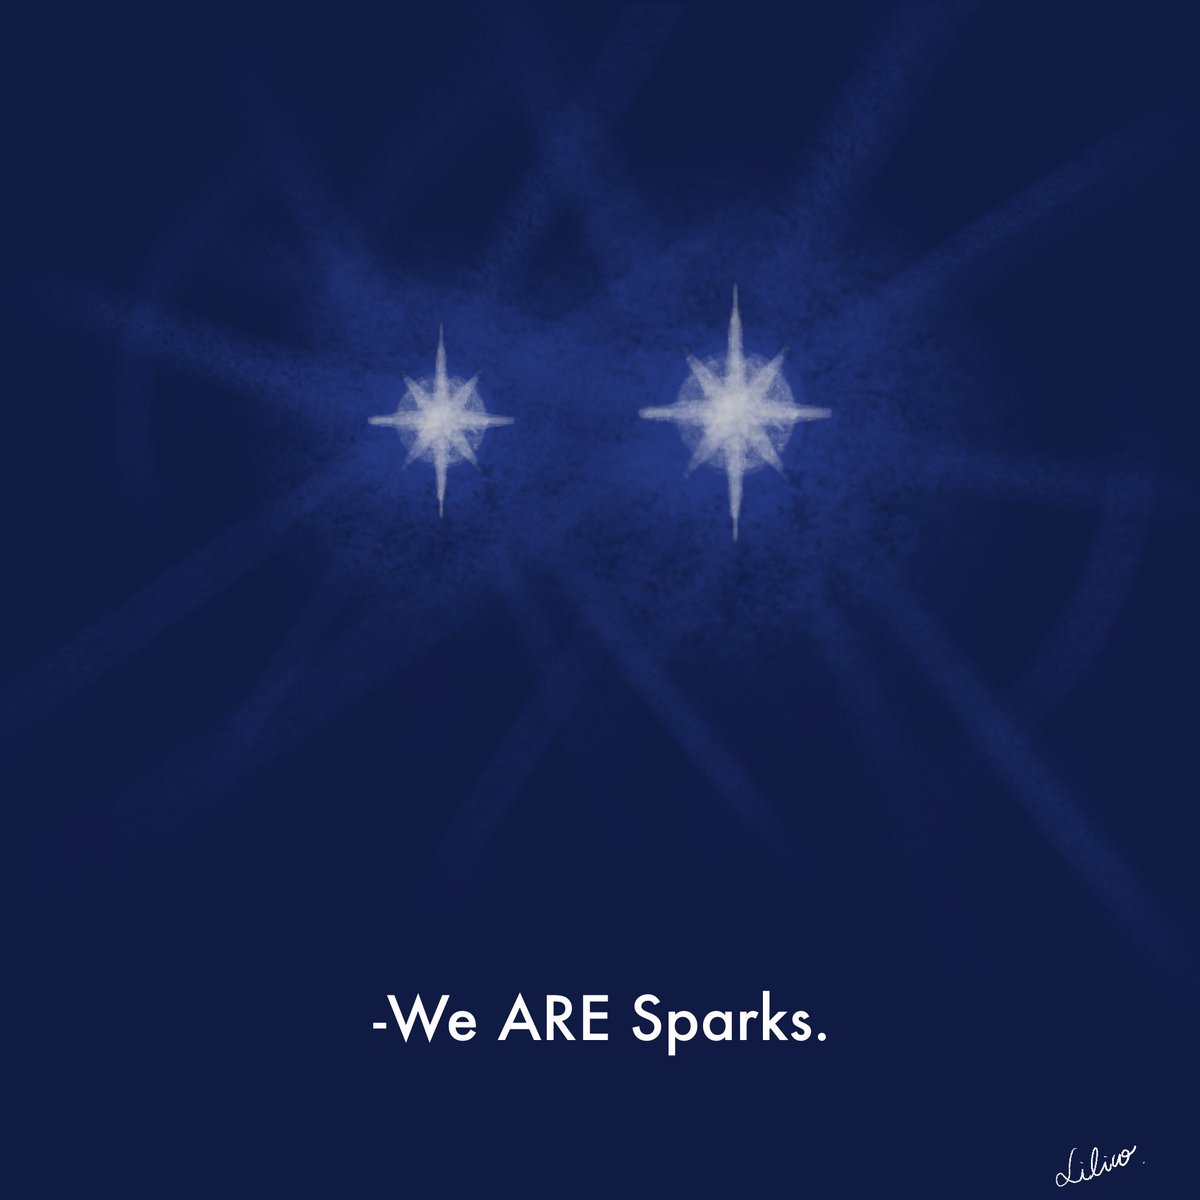 #Sparkstember

Day 30

Who is Sparks?

#Sparks
#tectecs